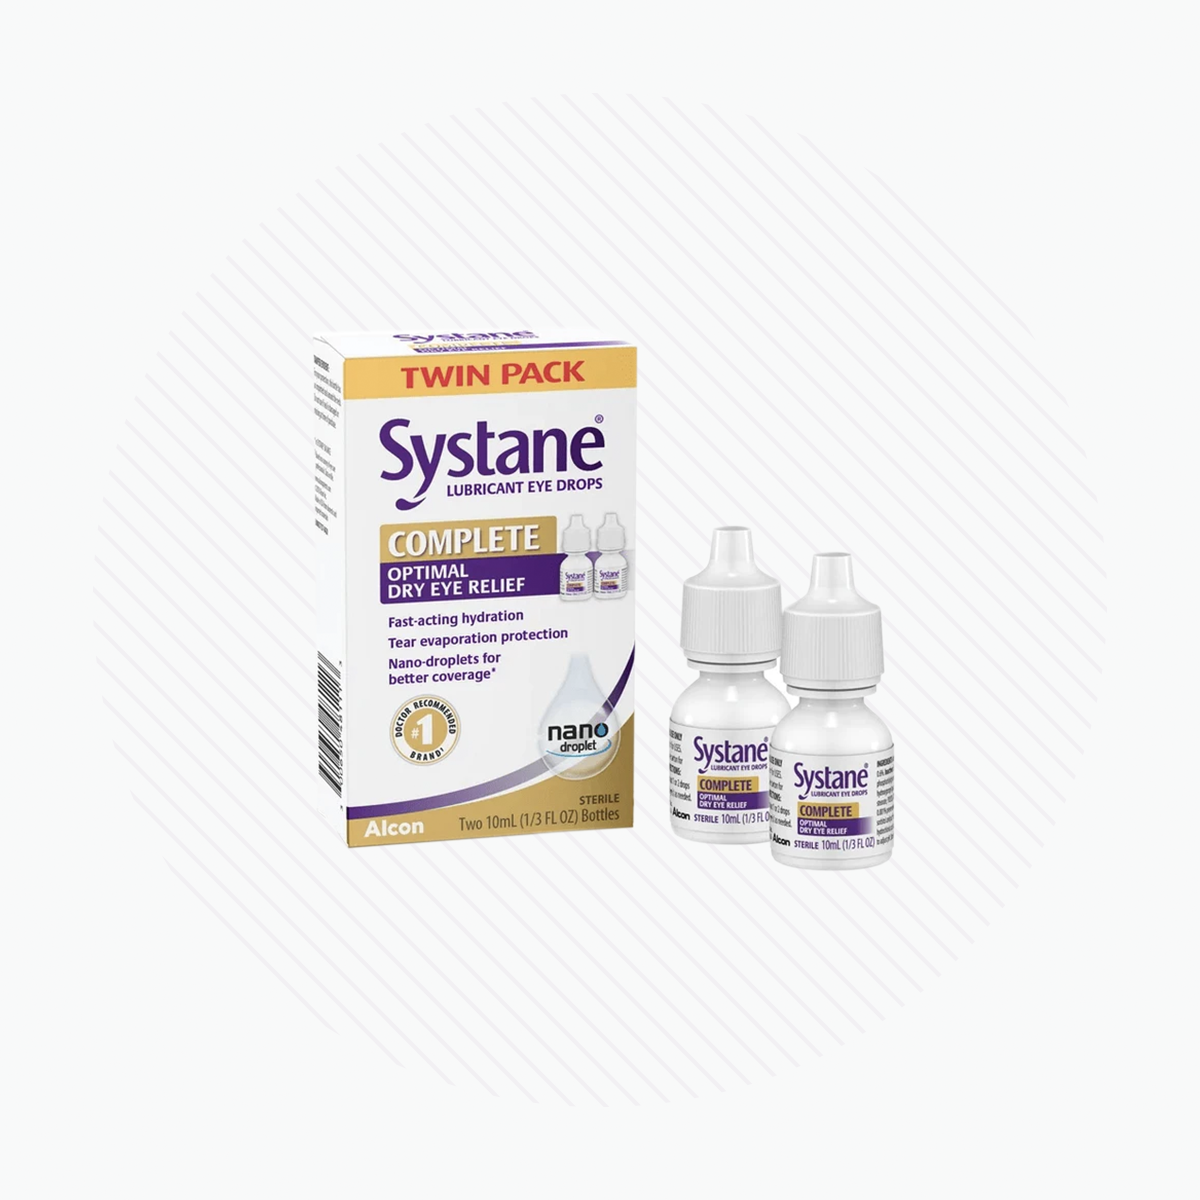 Systane Complete, Lubricant Eye Drops for Dry Eye Symptoms, Twin Pack (2 x 10ml Bottle)